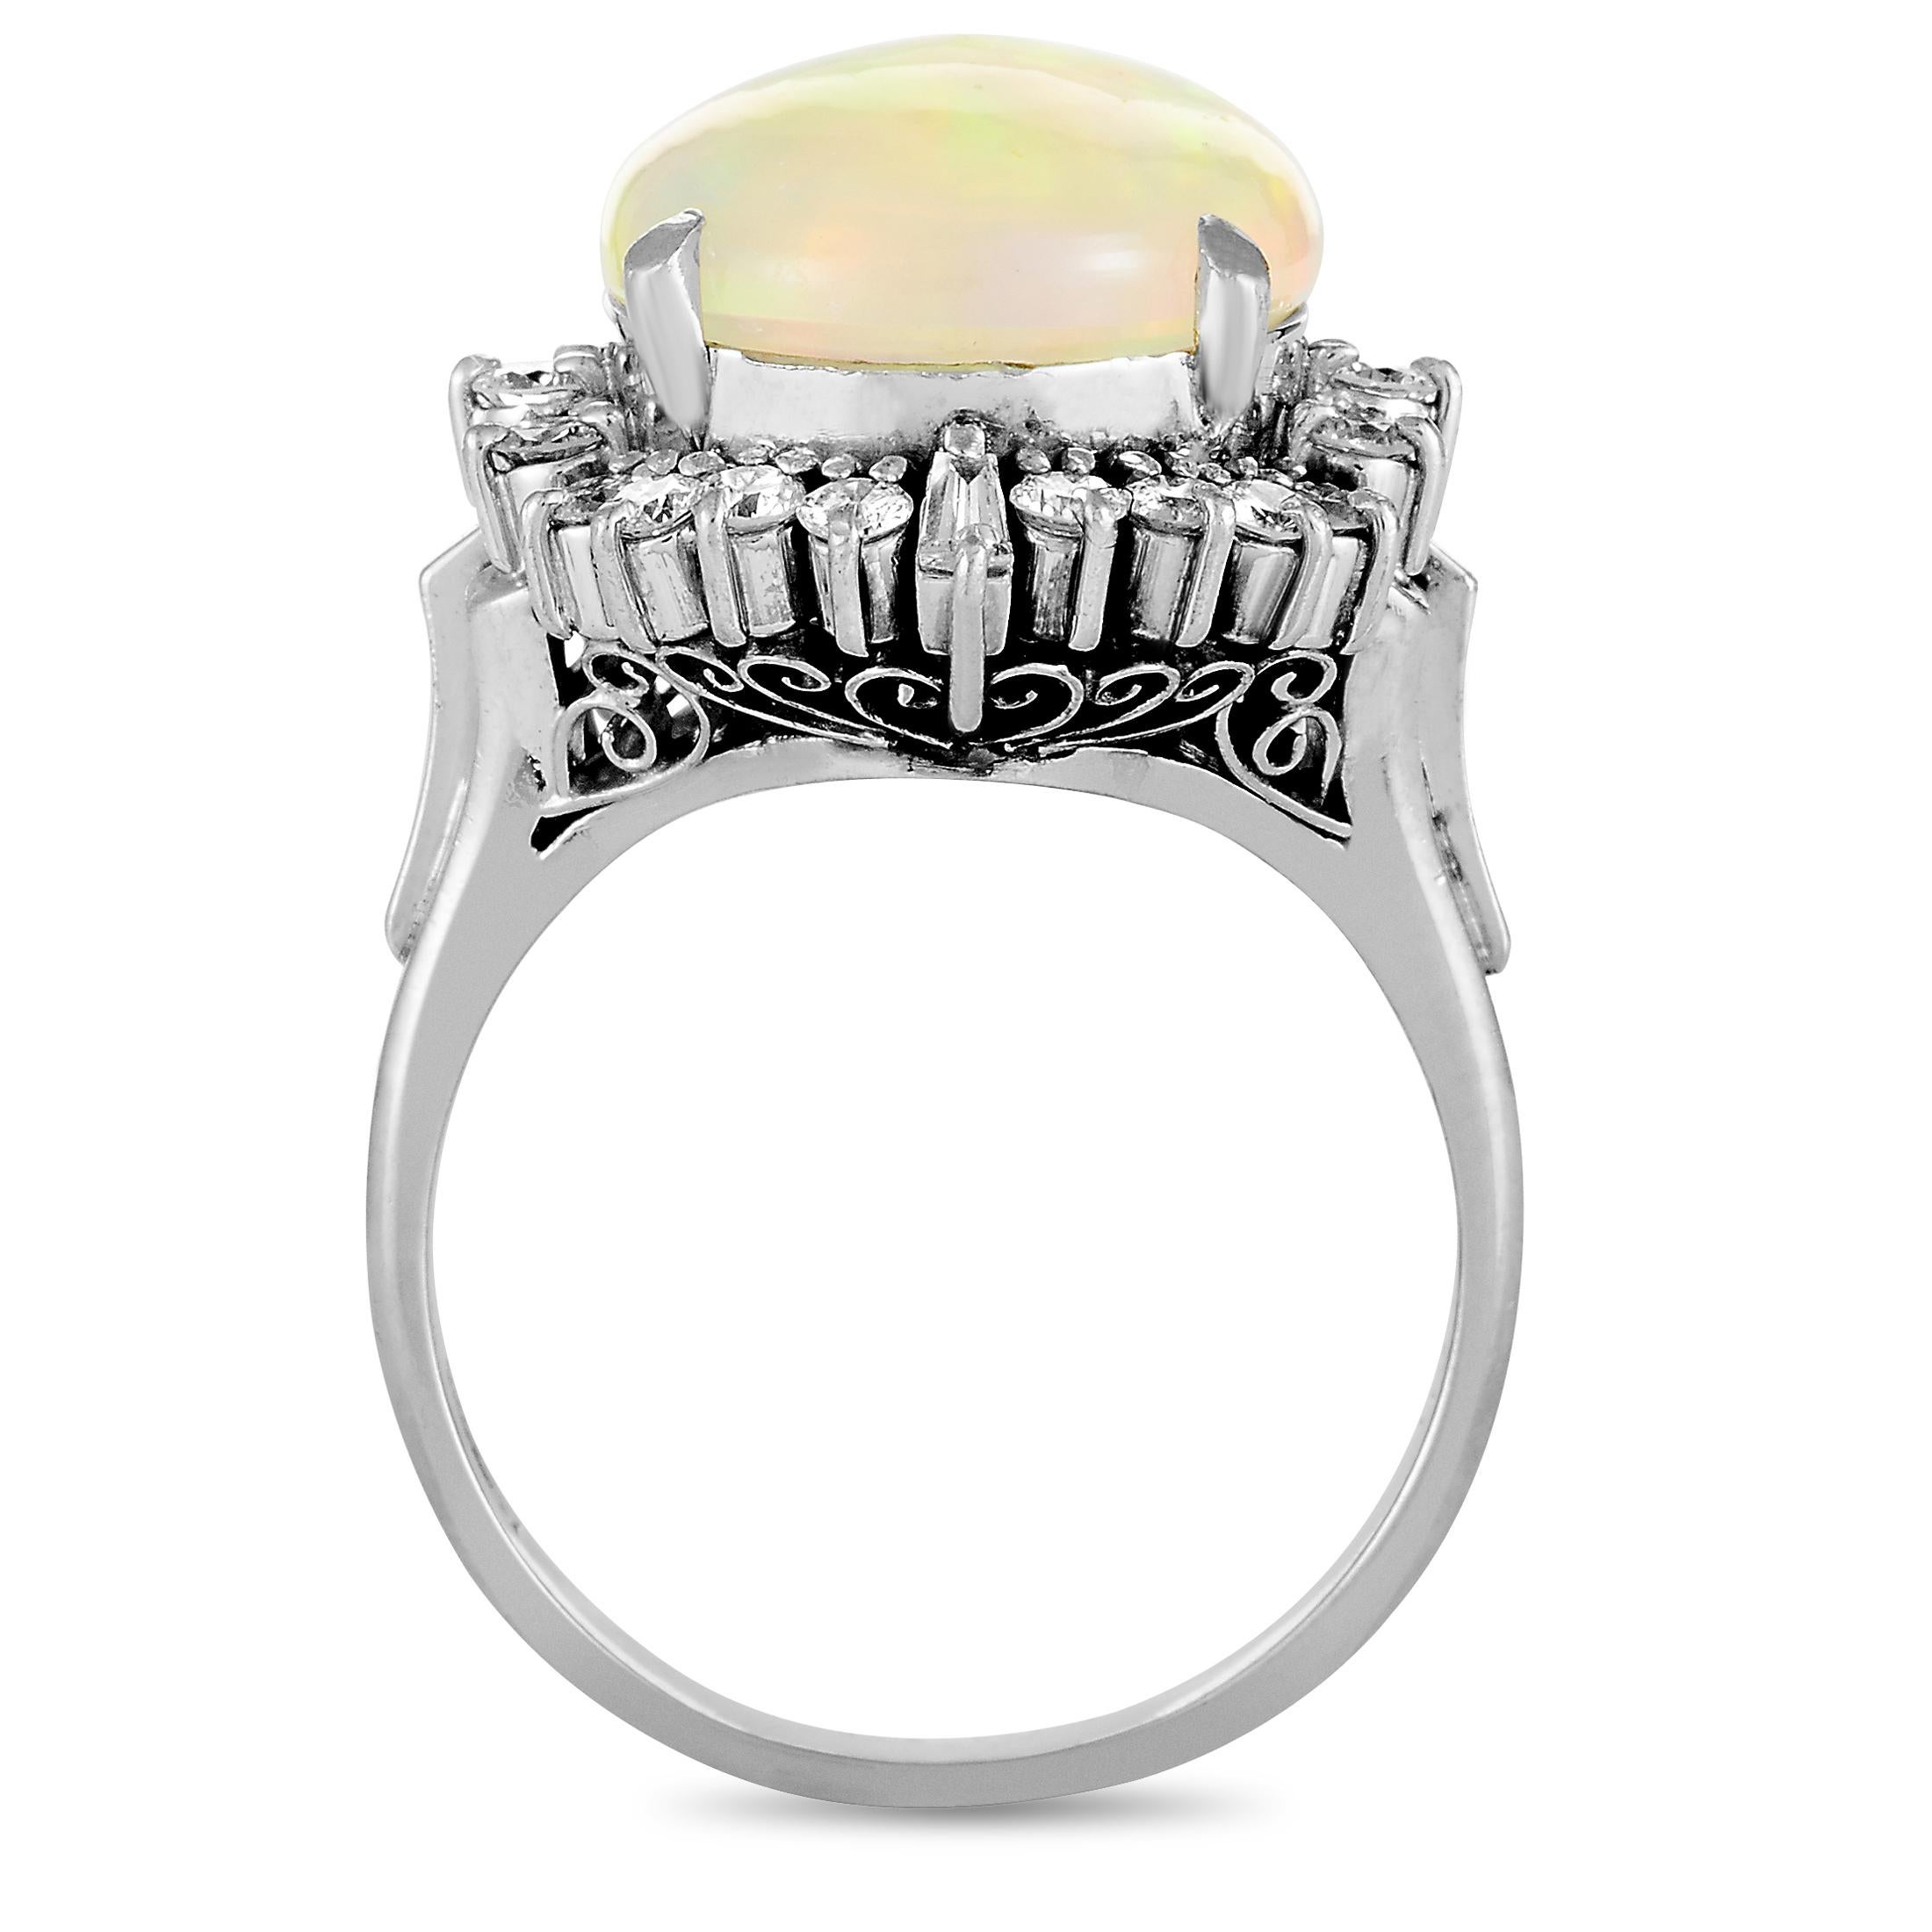 This ring is made of platinum and weighs 8.8 grams. It boasts band thickness of 2 mm and top height of 10 mm, while top dimensions measure 15 by 19 mm. The ring is set with an opal that weighs 4.54 carats and with diamonds that total 0.60